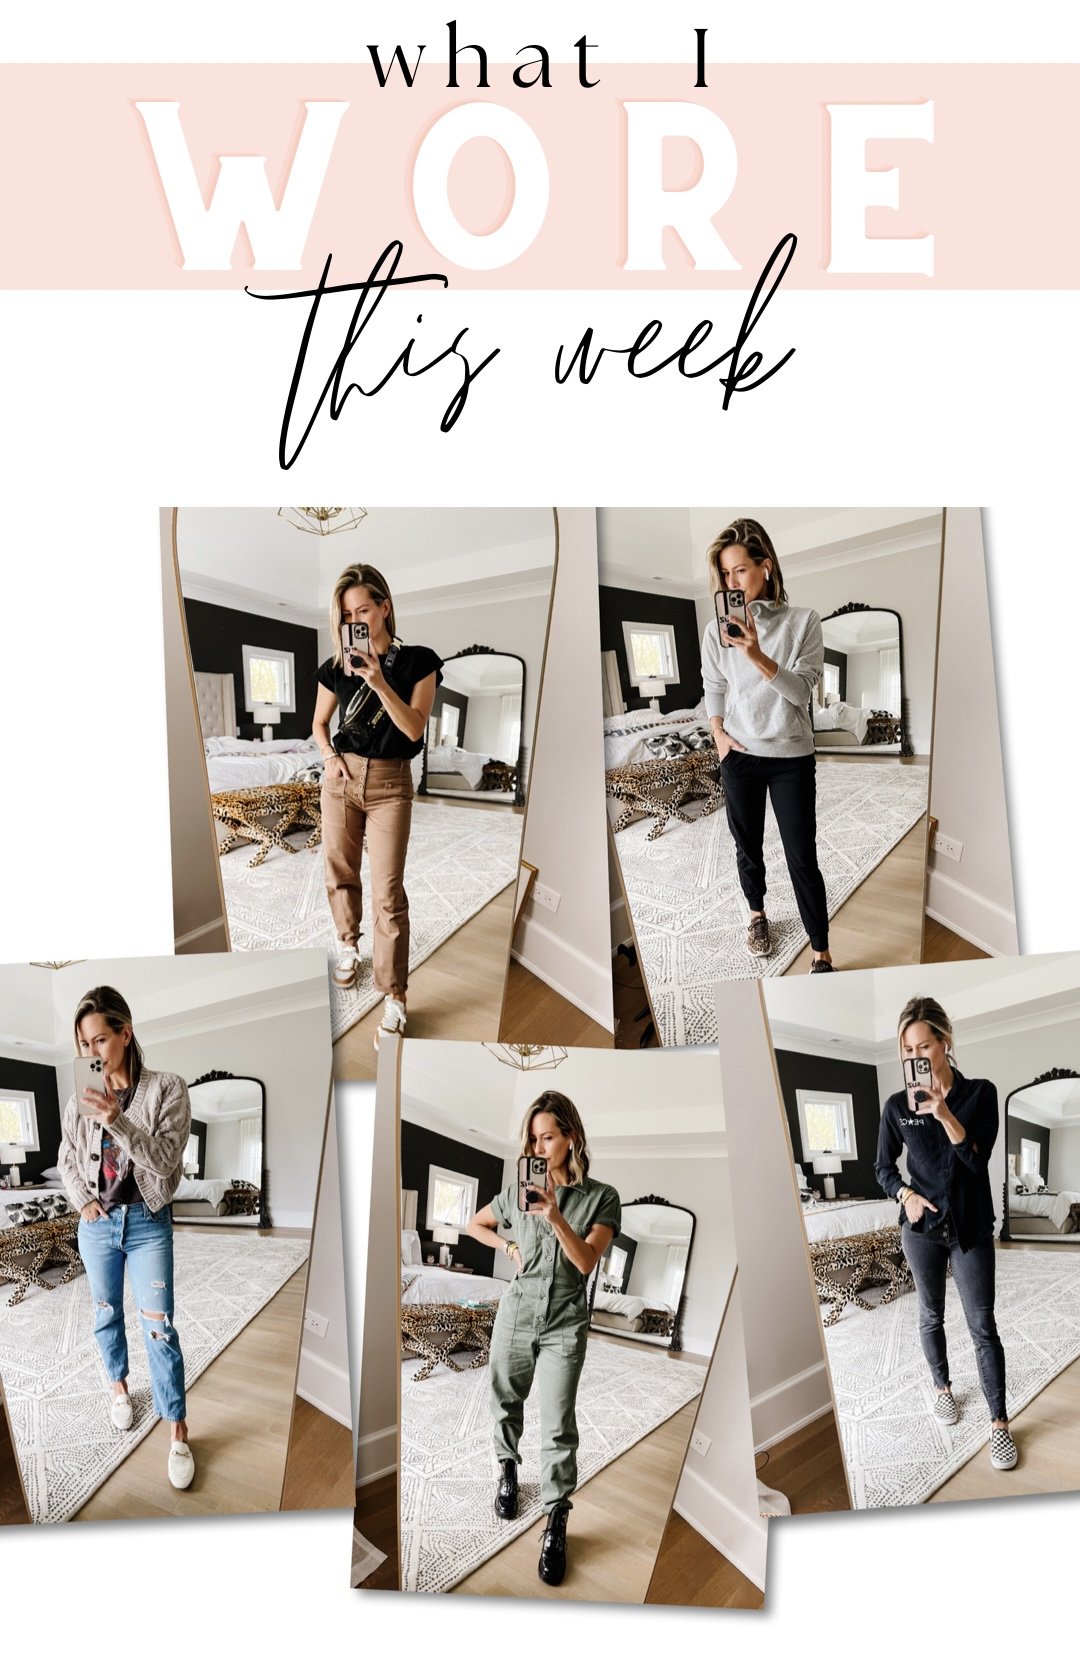 What I wore this week graphic